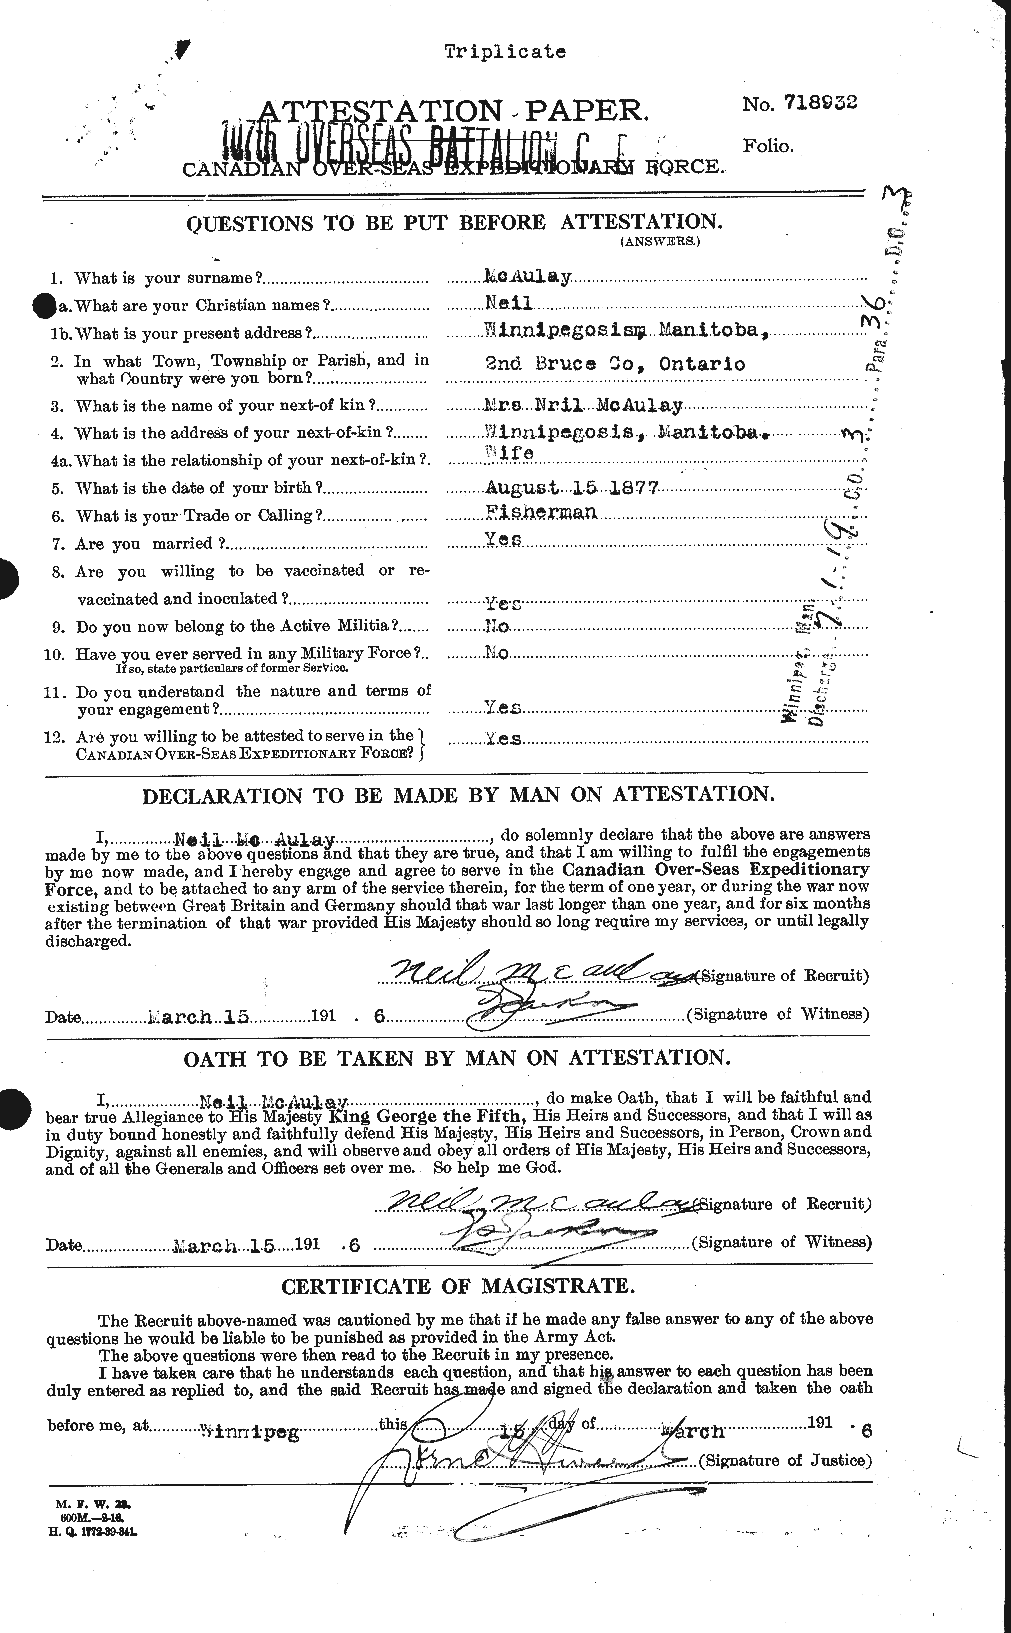 Personnel Records of the First World War - CEF 130753a